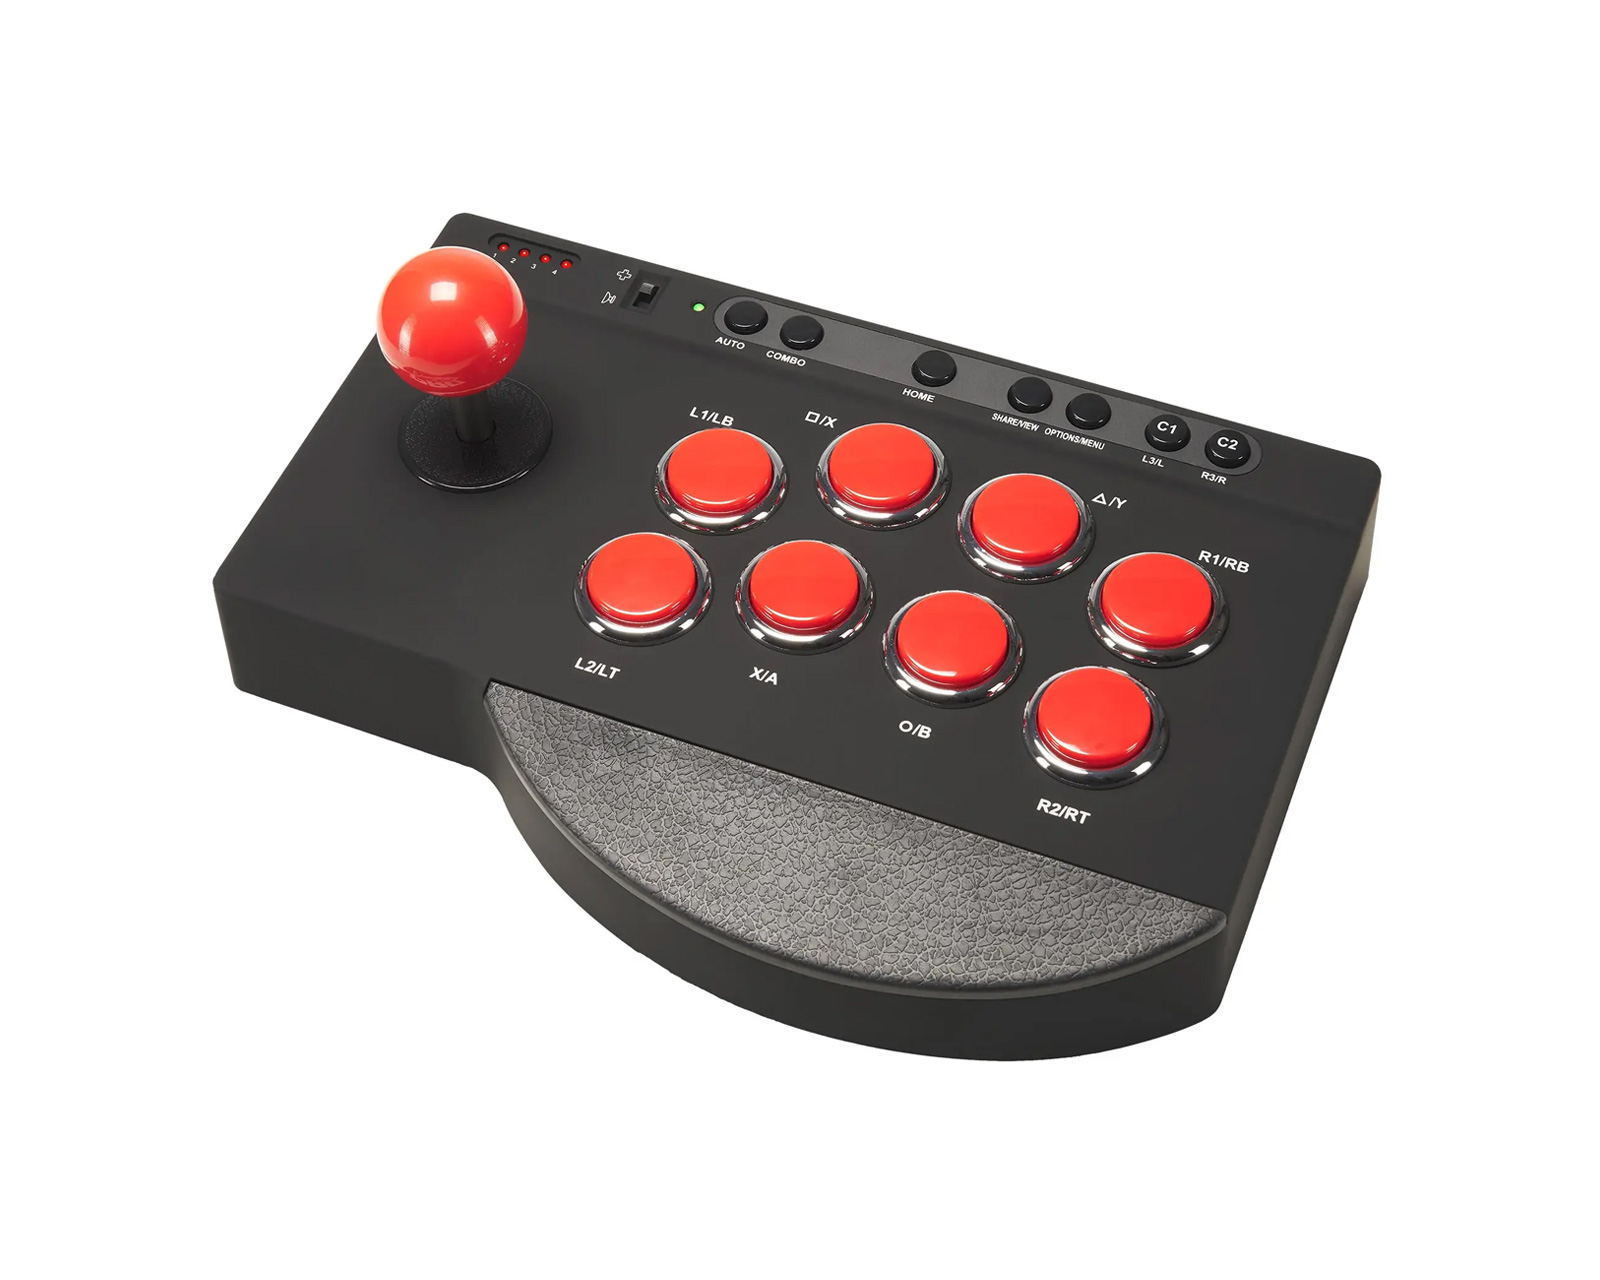 Portable Arcade Fight Stick, Arcade Fighting Stick Fighter USB Joystick  Stick Buttons Controller for Switch/PC/PS3